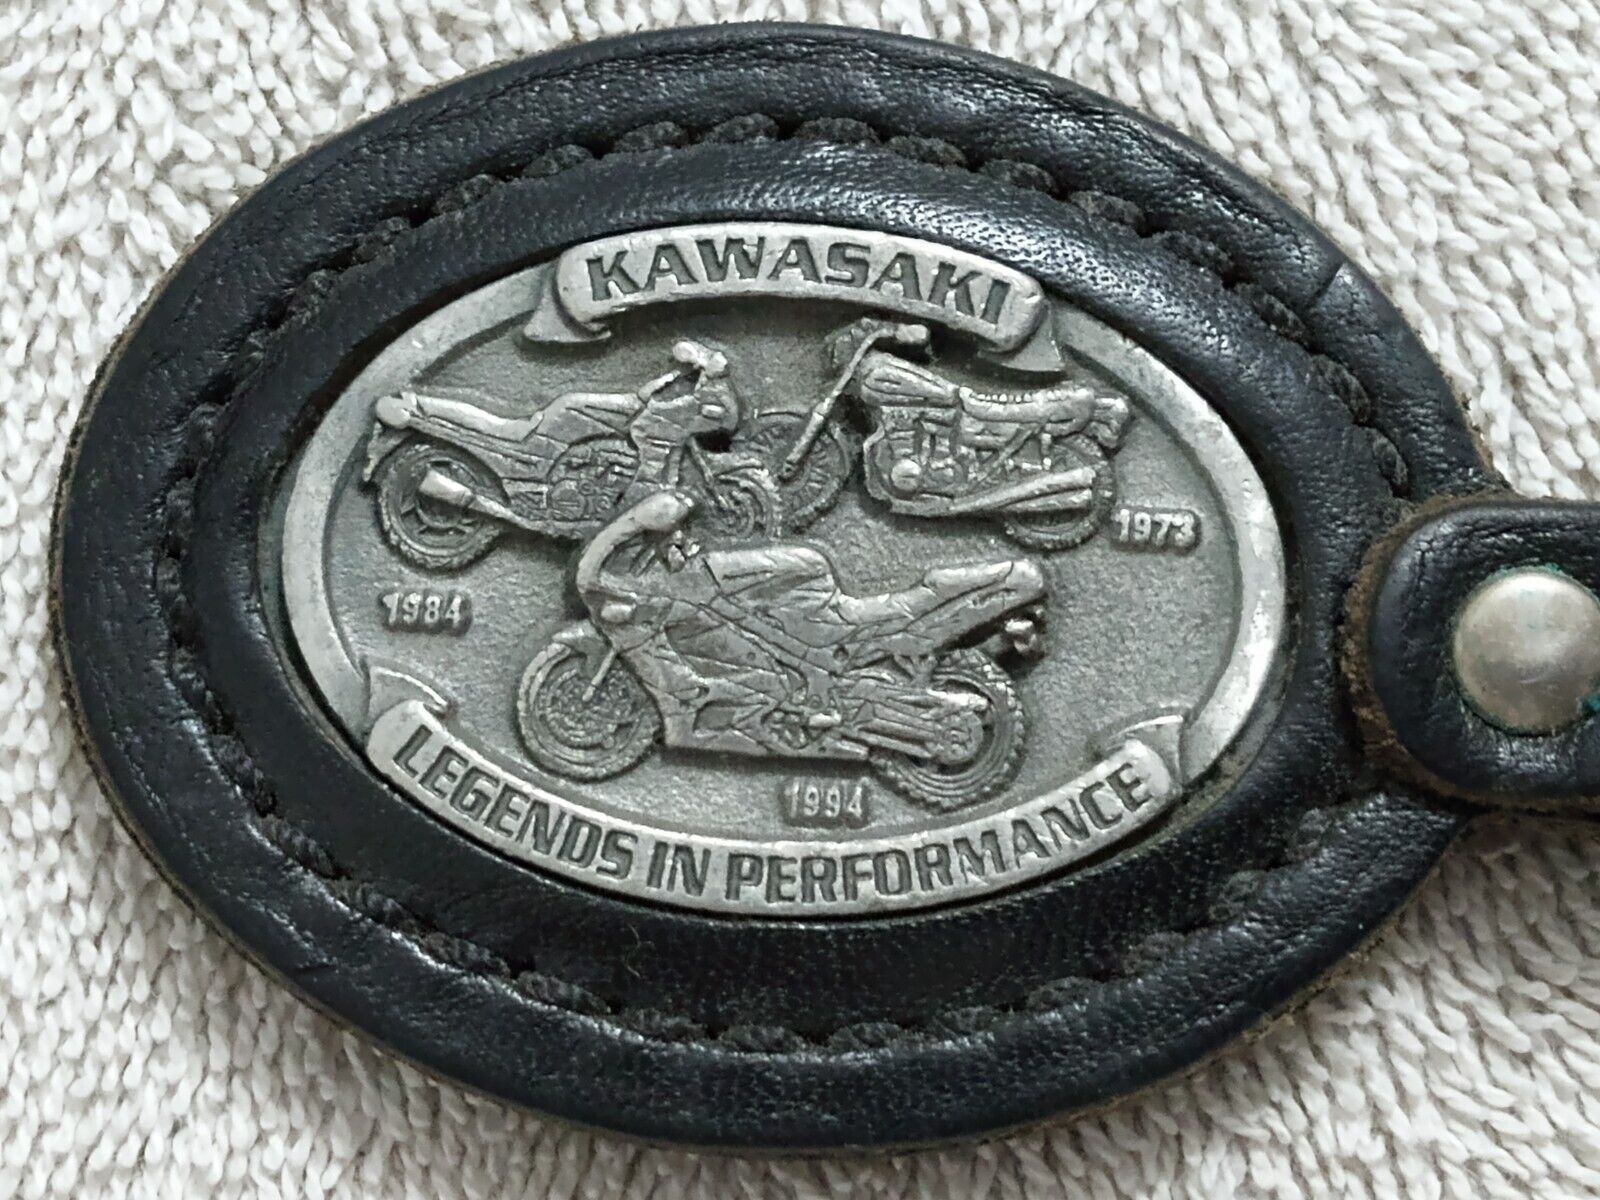 Vtg/Collectible Kawasaki Legends in Performance Key Fob Z1 ZX900 ZX9R 1973/84/94